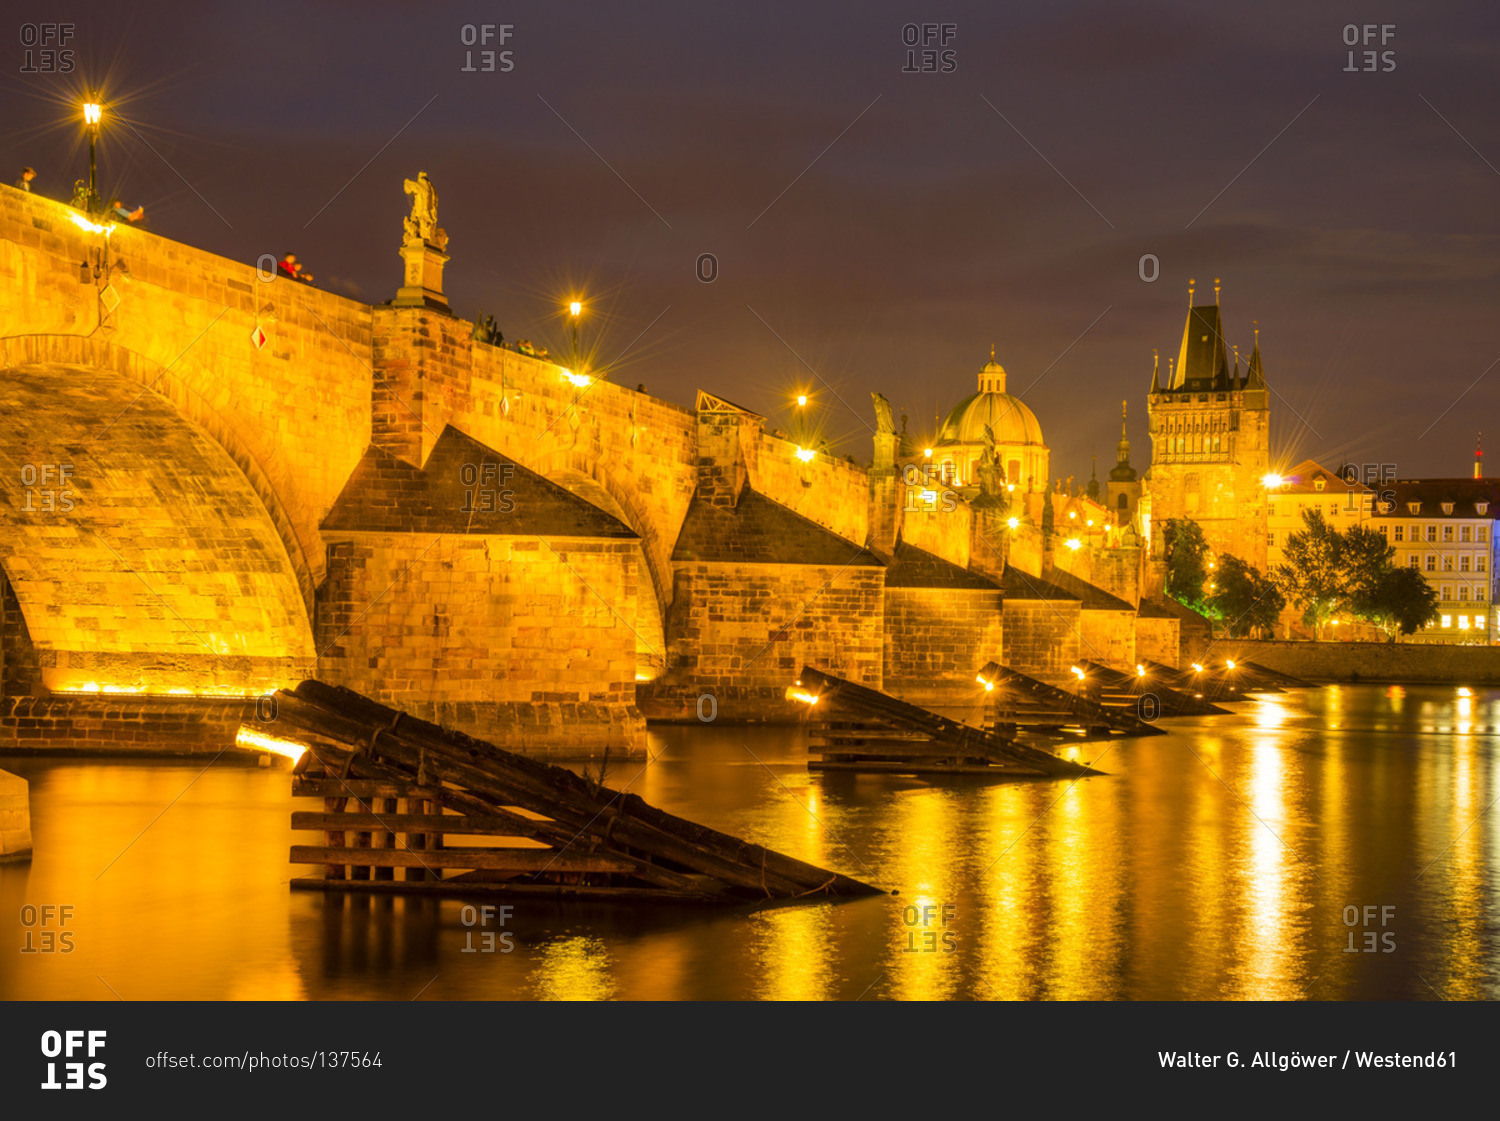 Charles Bridge and Old Town Bridge Tower in the evening